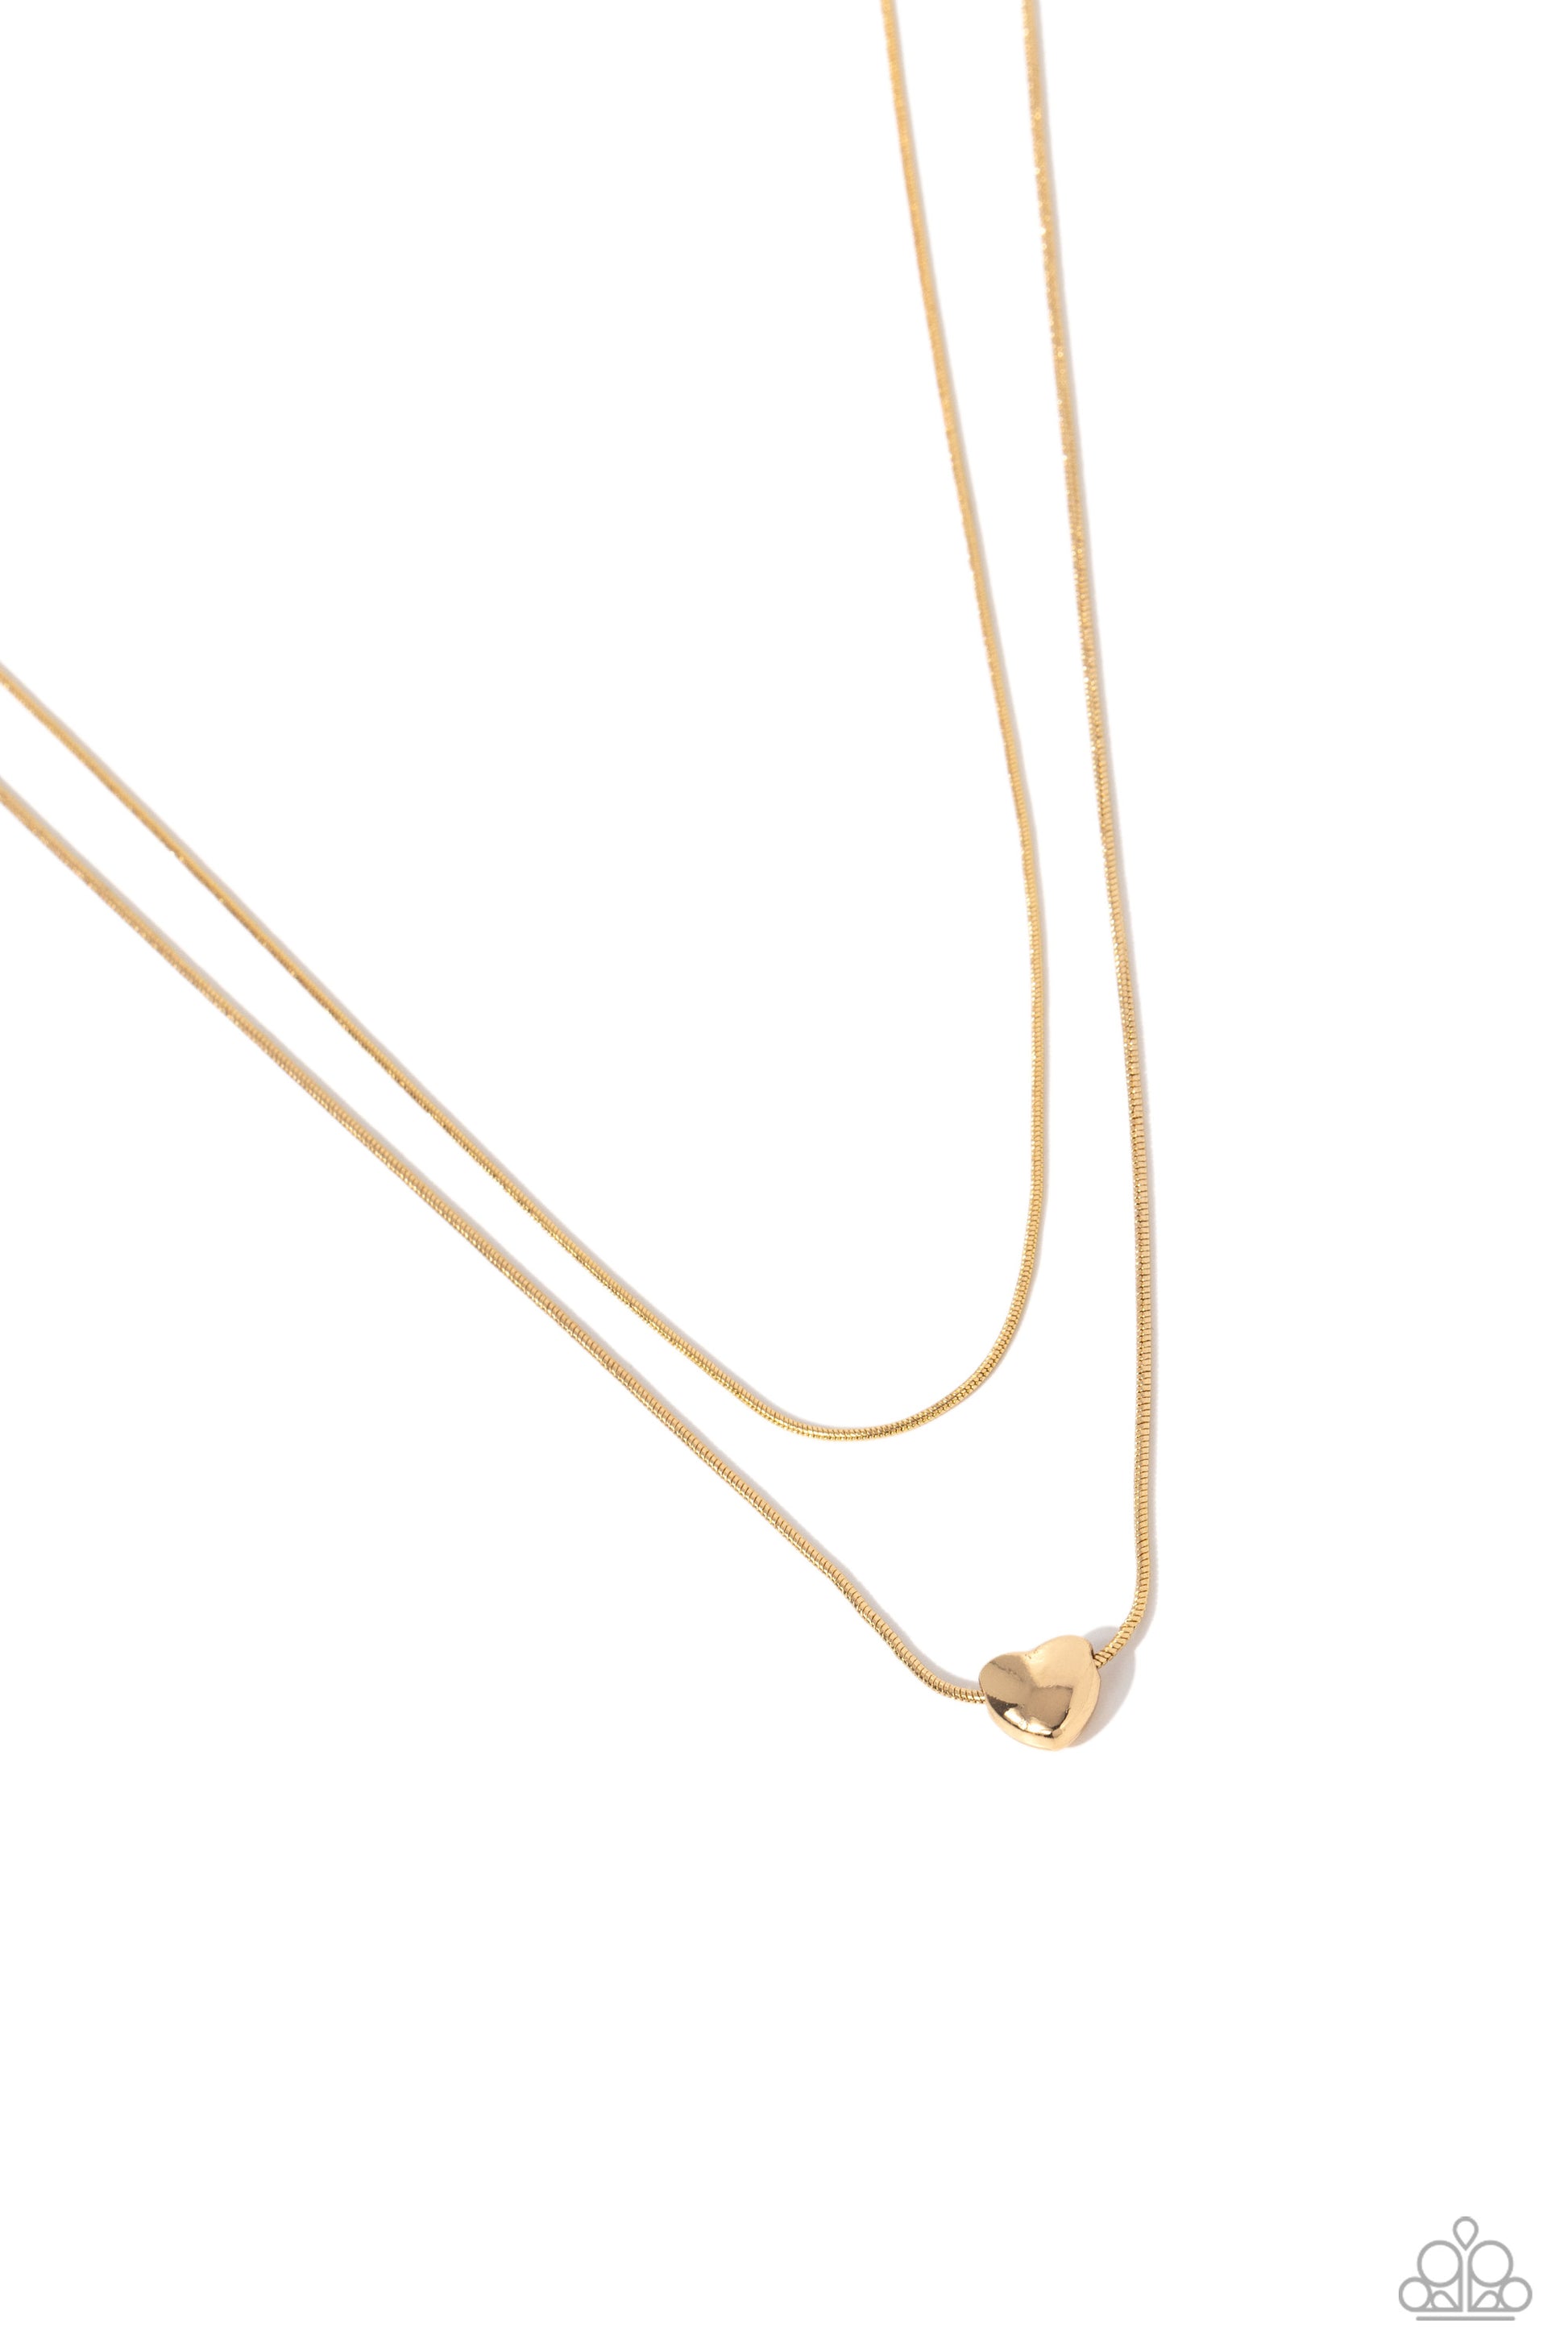 Sweetheart Series Gold Heart Necklace - Paparazzi Accessories  Infused with a dainty gold snake chain, a sleek gold heart charm glides along an additional gold snake chain, creating a stunning layered look. Features an adjustable clasp closure.  Sold as one individual necklace. Includes one pair of matching earrings.  P2DA-GDXX-325XX